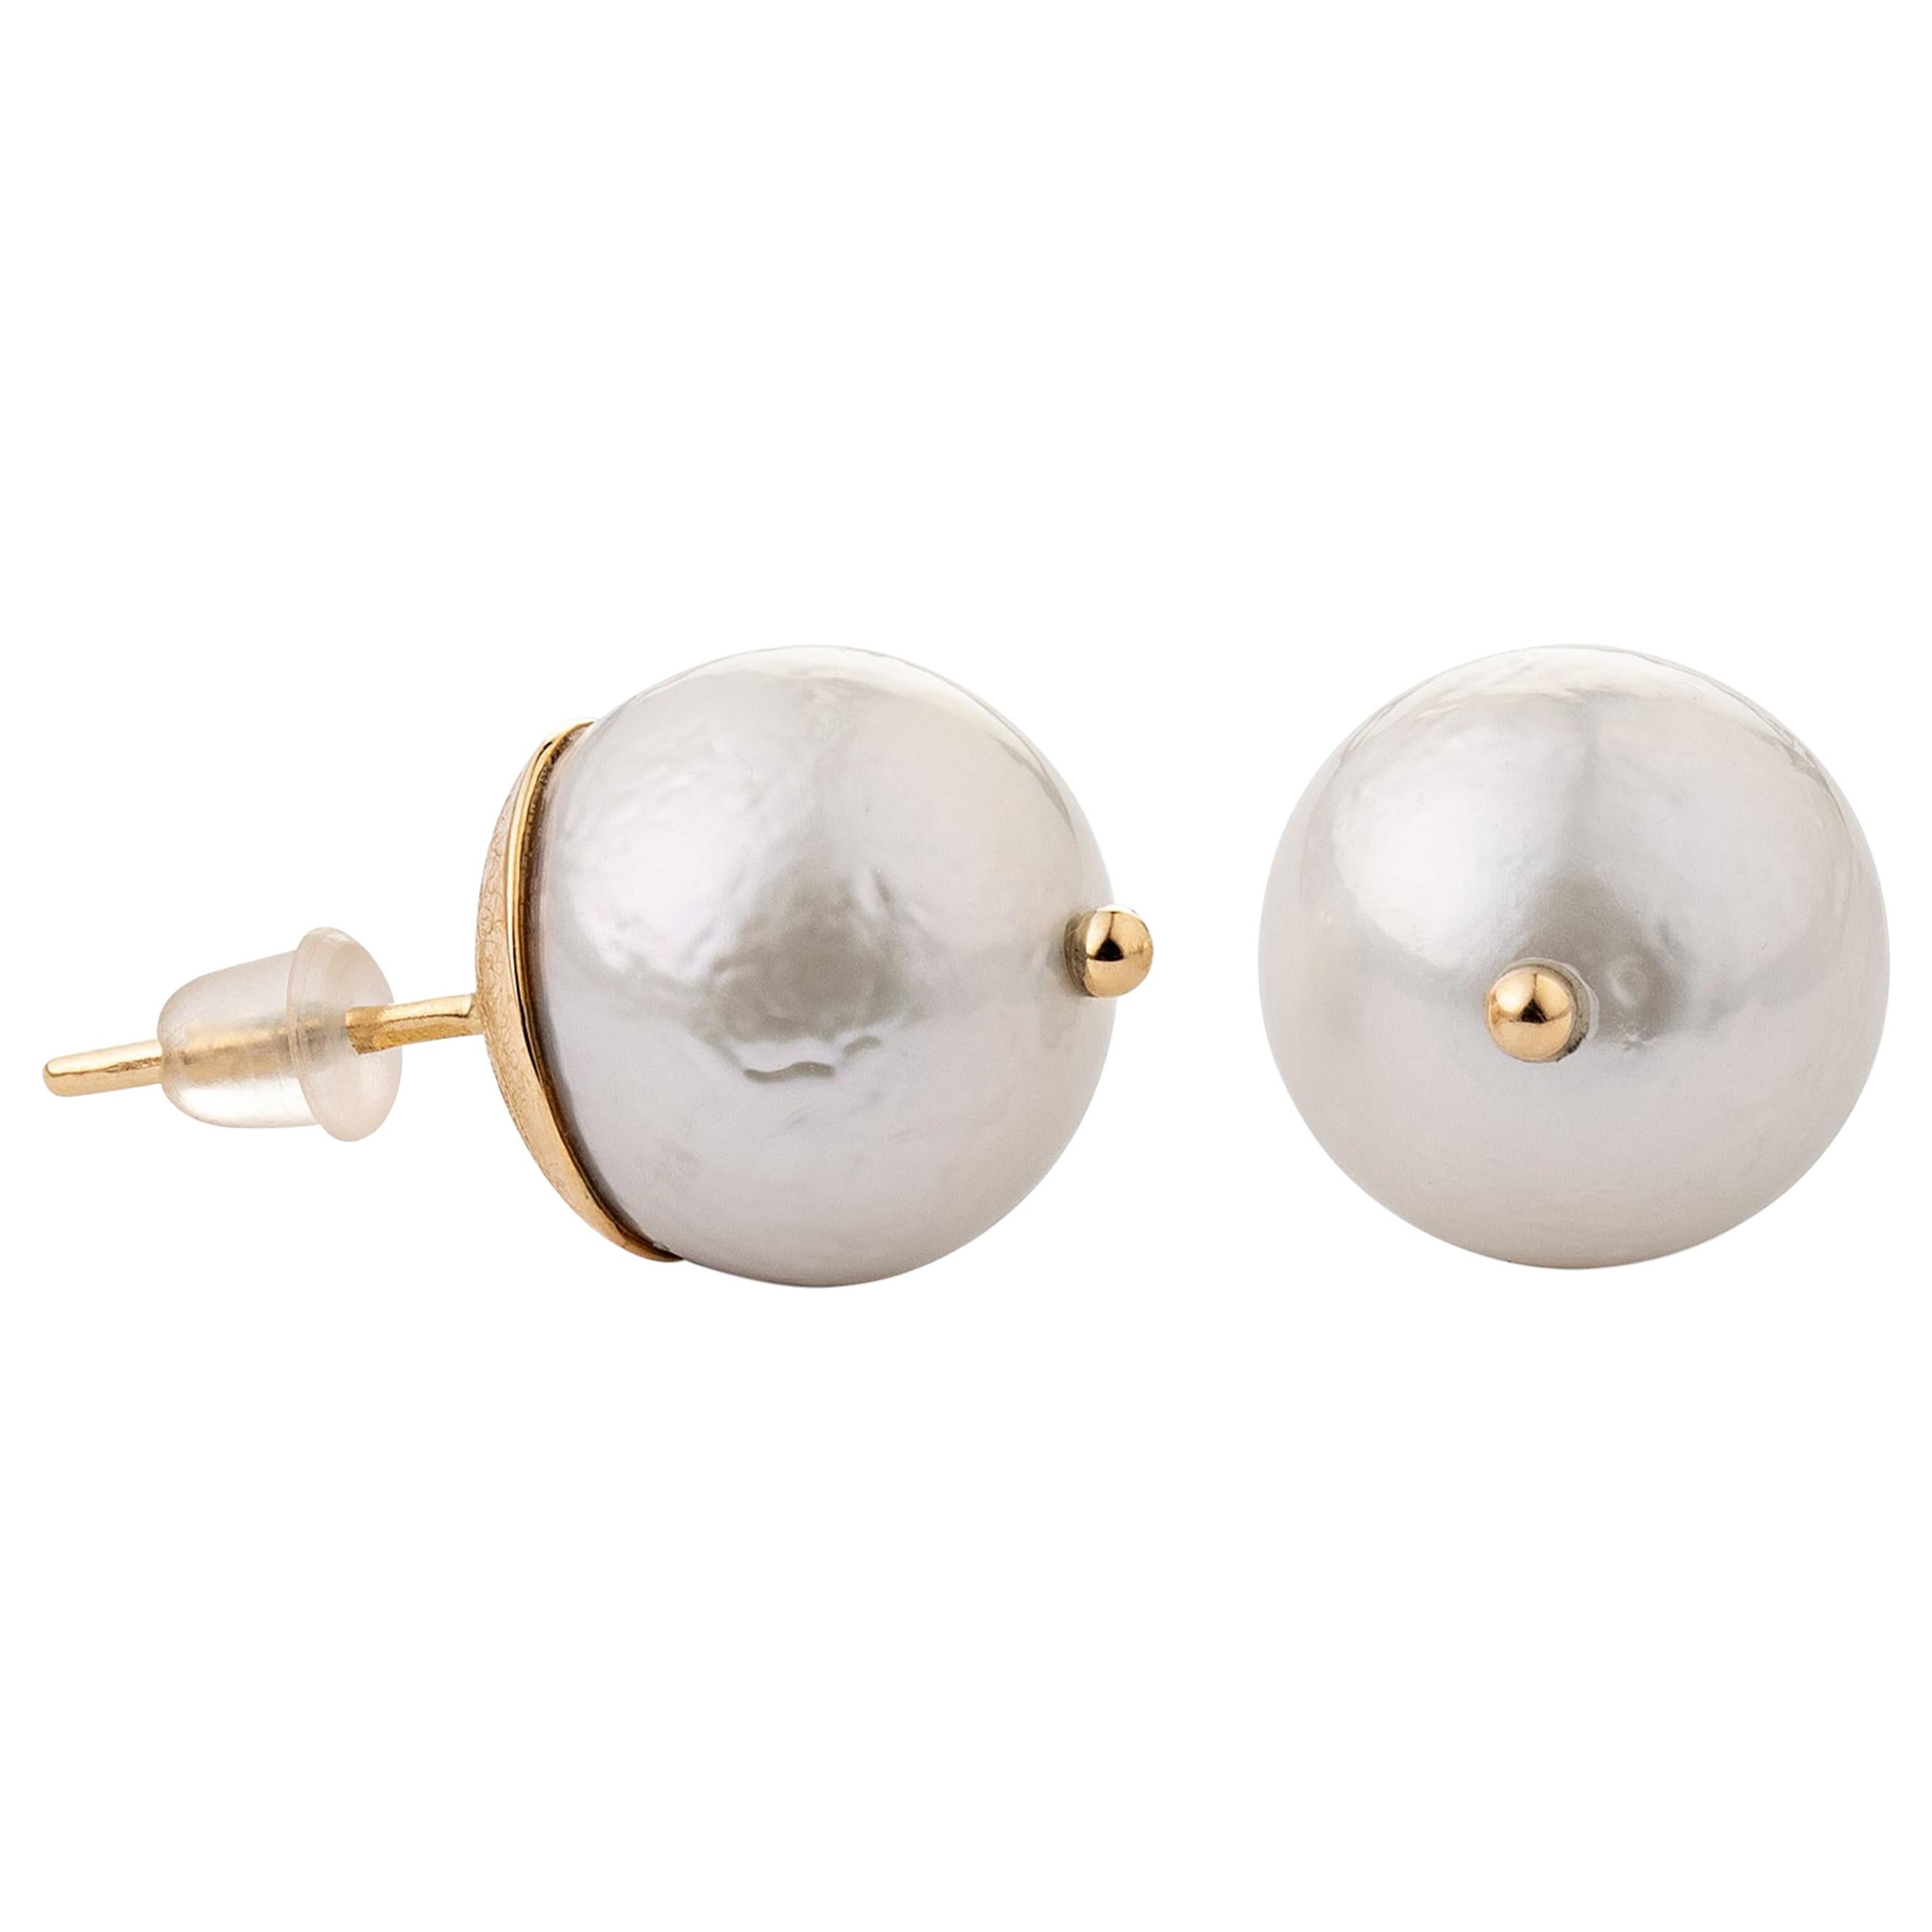 White Pearl Stud Earrings Set in 14 Karat Gold Handmade Ready to Ship For Sale